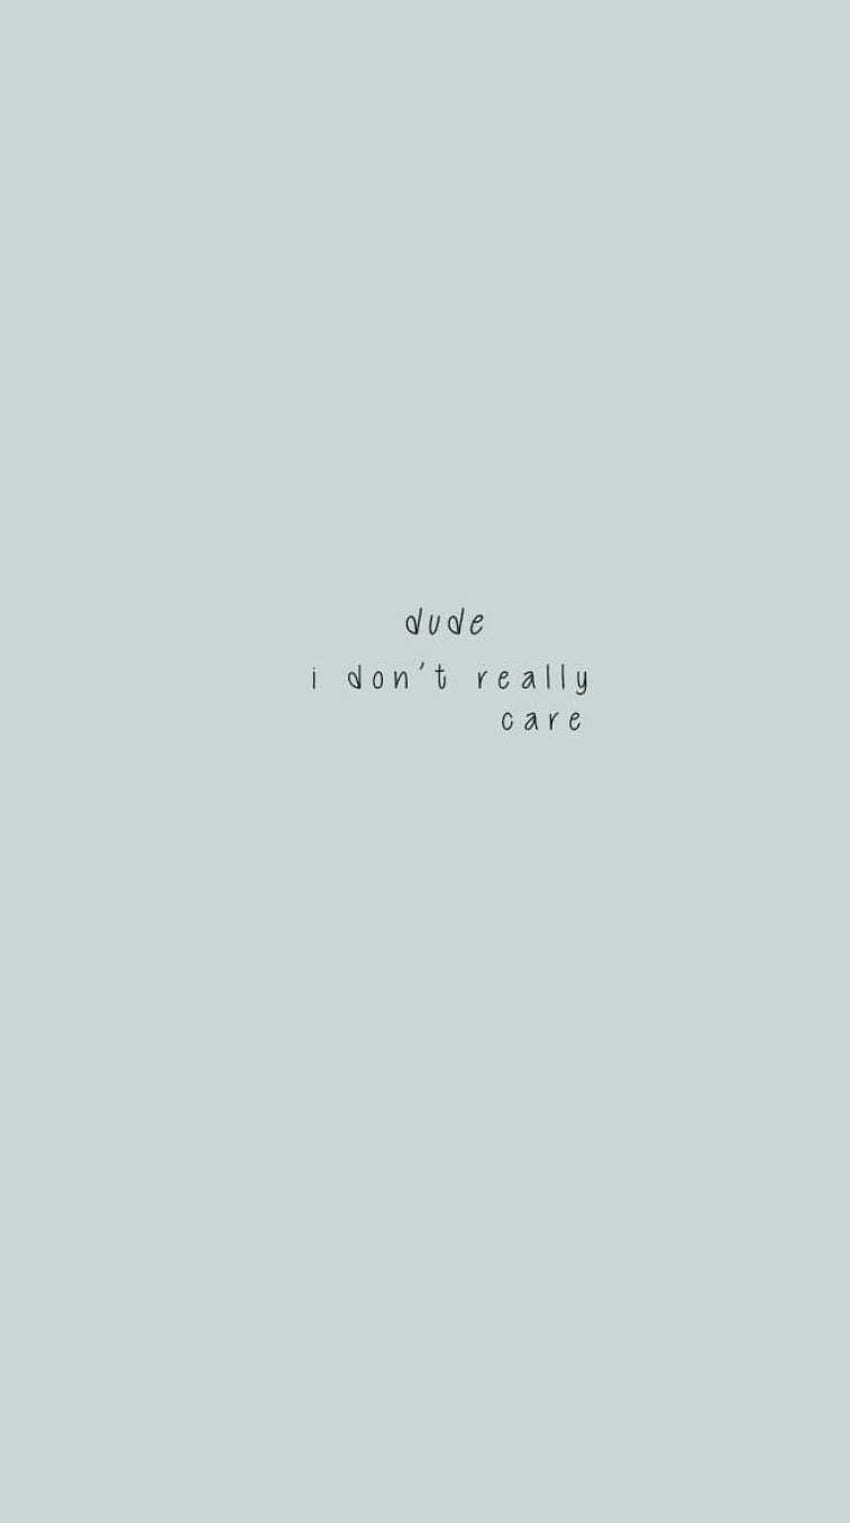 Dude! I don't really care - Idea , iPhone, Awesome White HD phone wallpaper